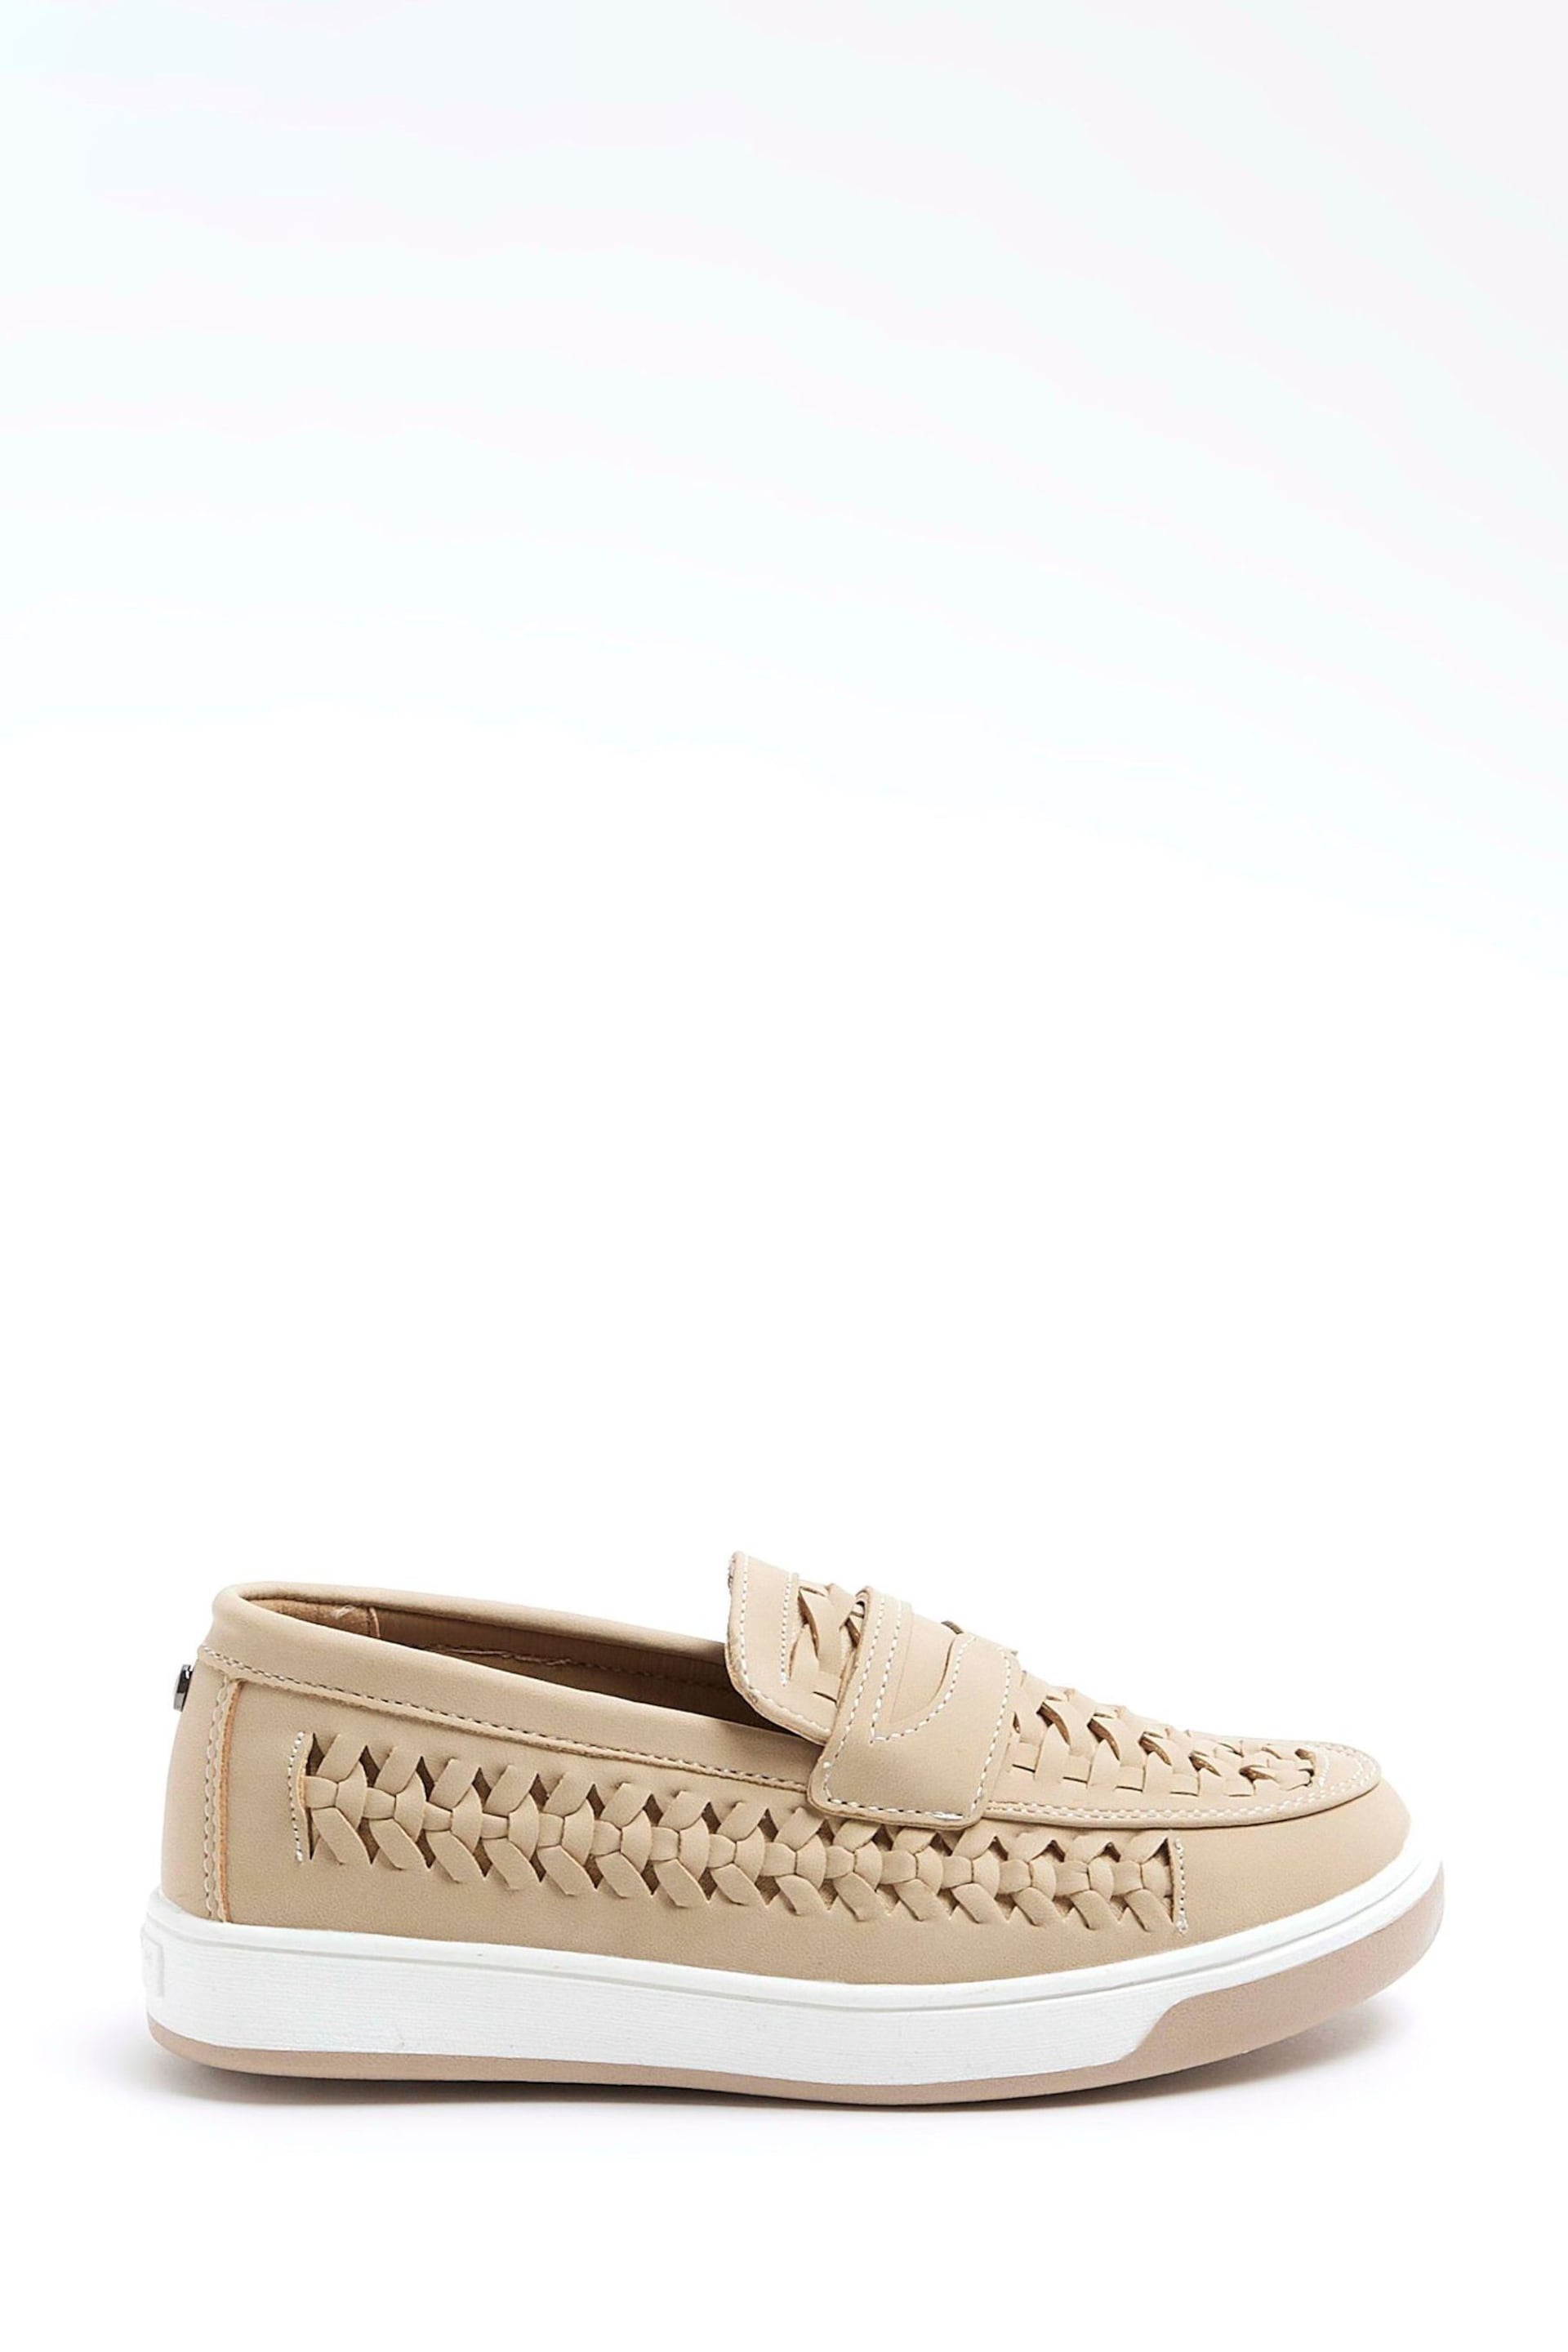 River Island Brown Boys Weave Loafers - Image 1 of 4